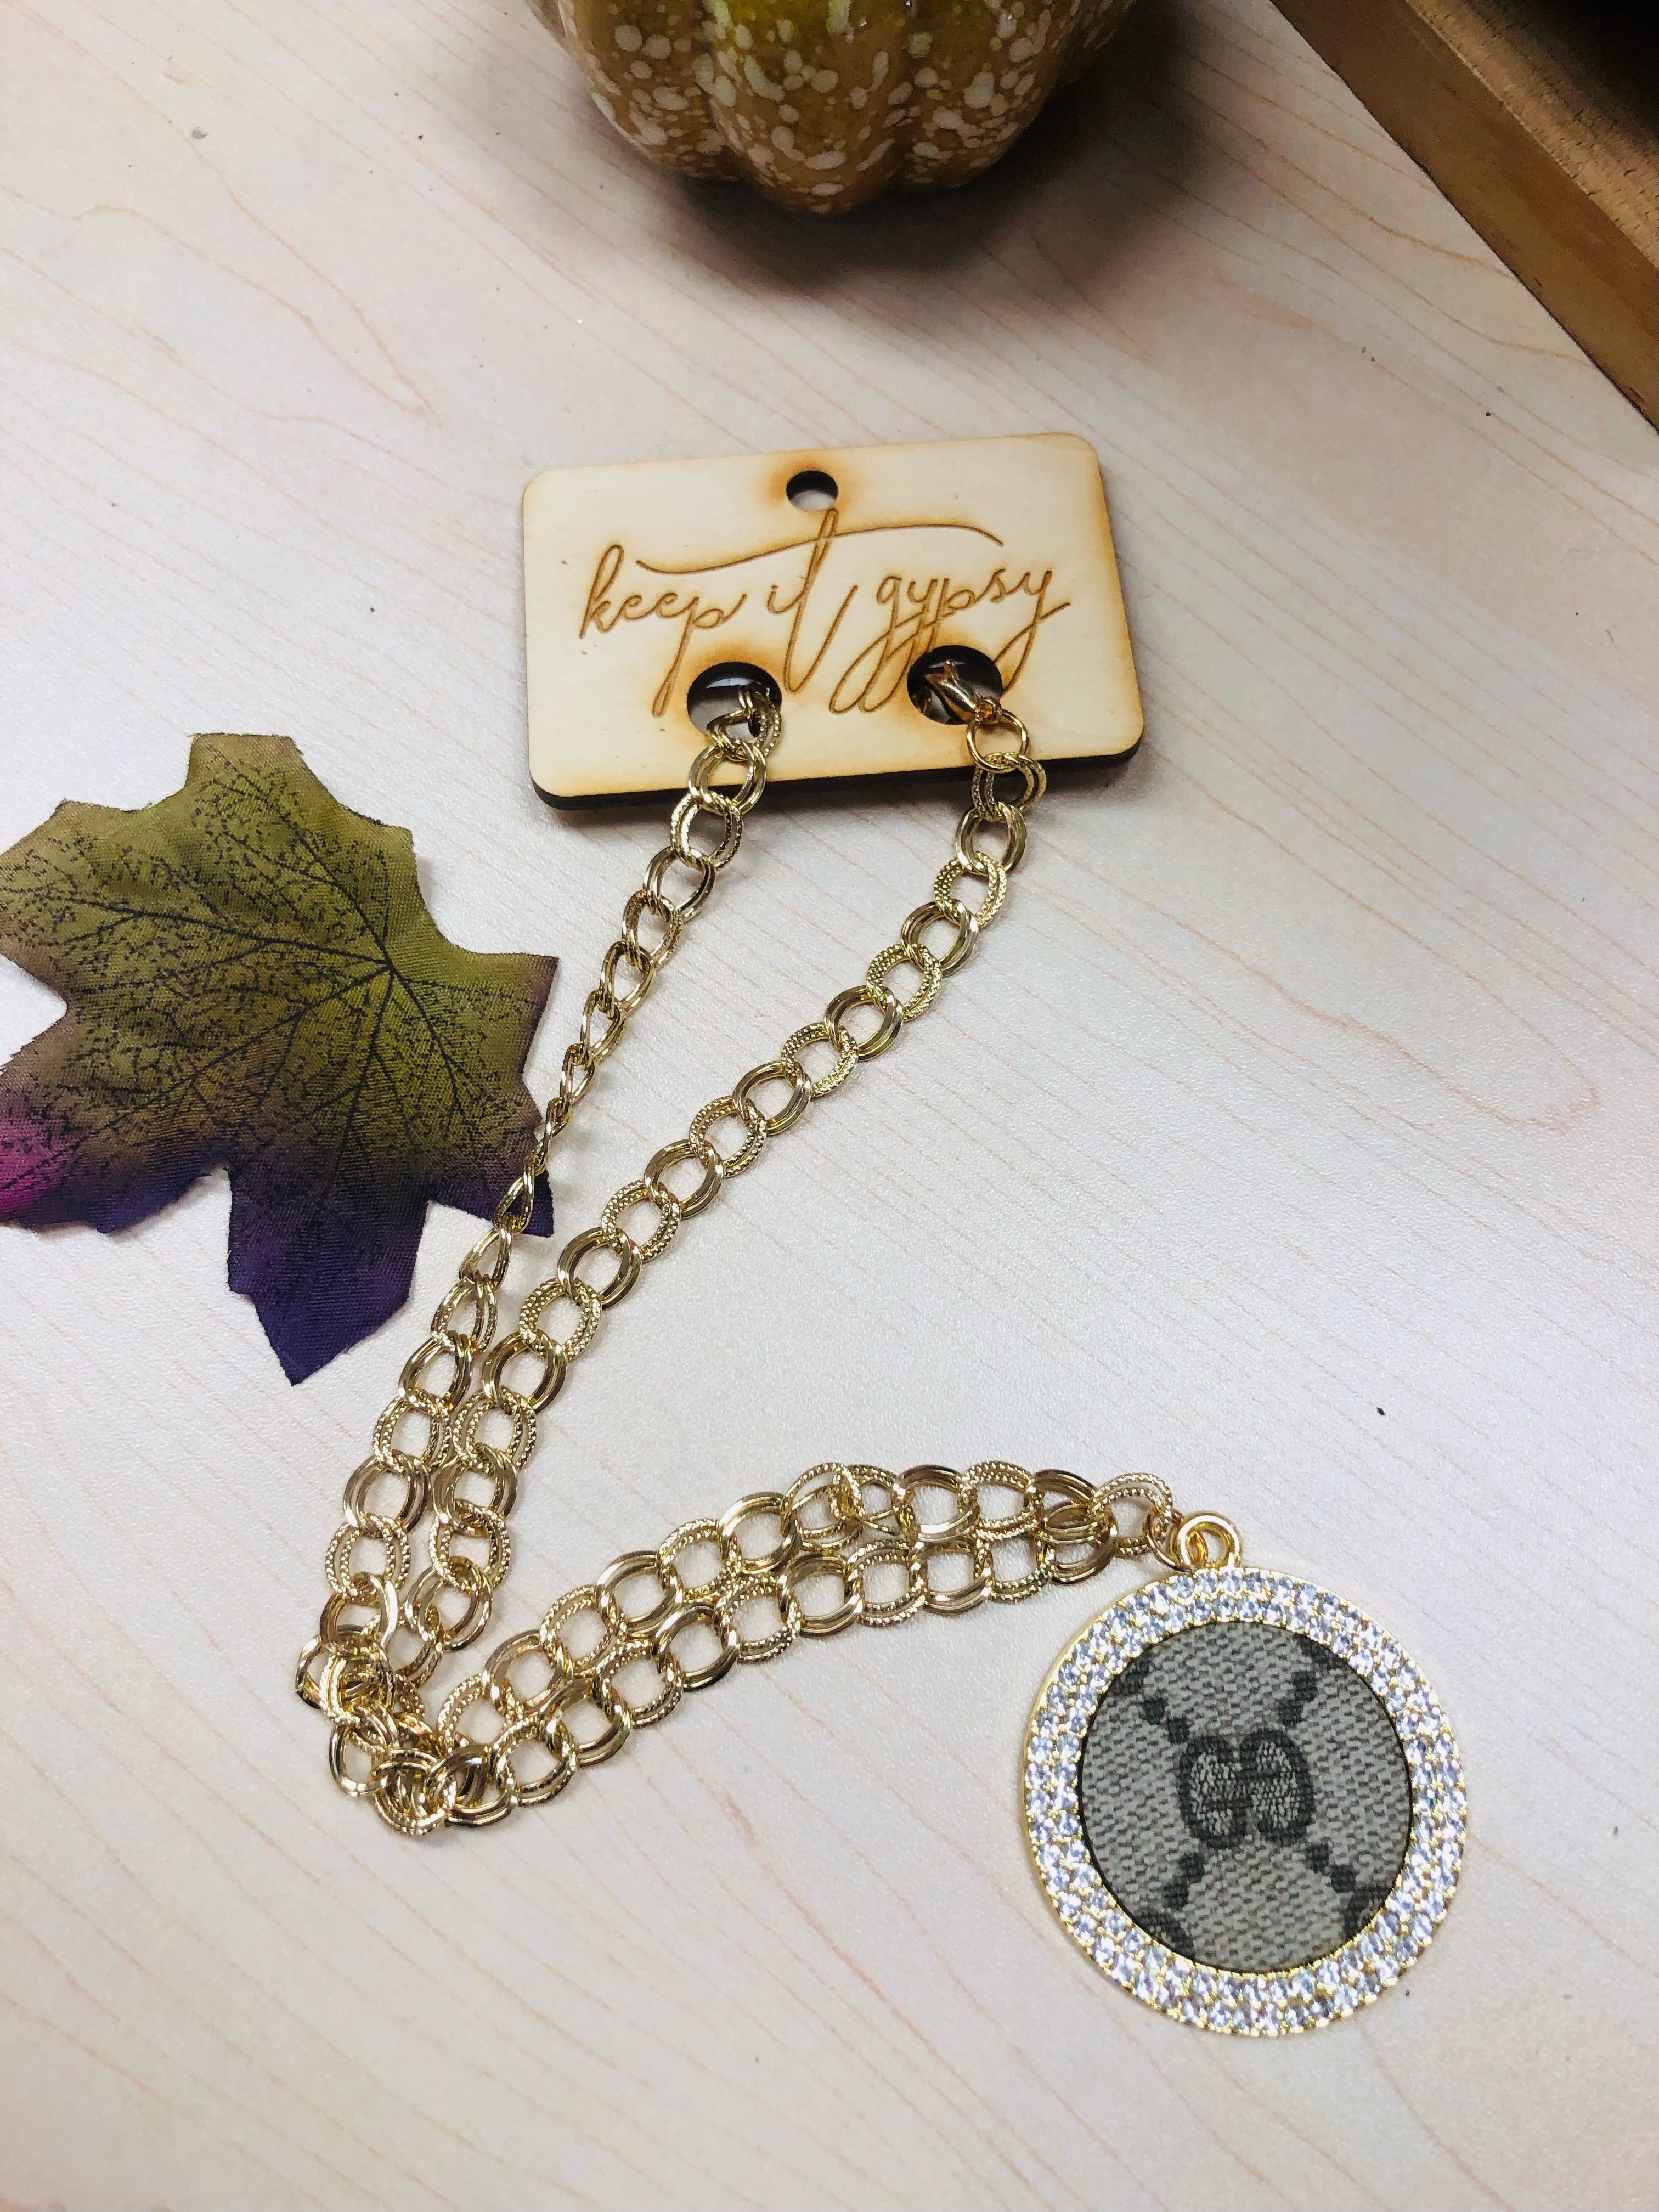 Keep It Gypsy Upcycled Gucci Necklace